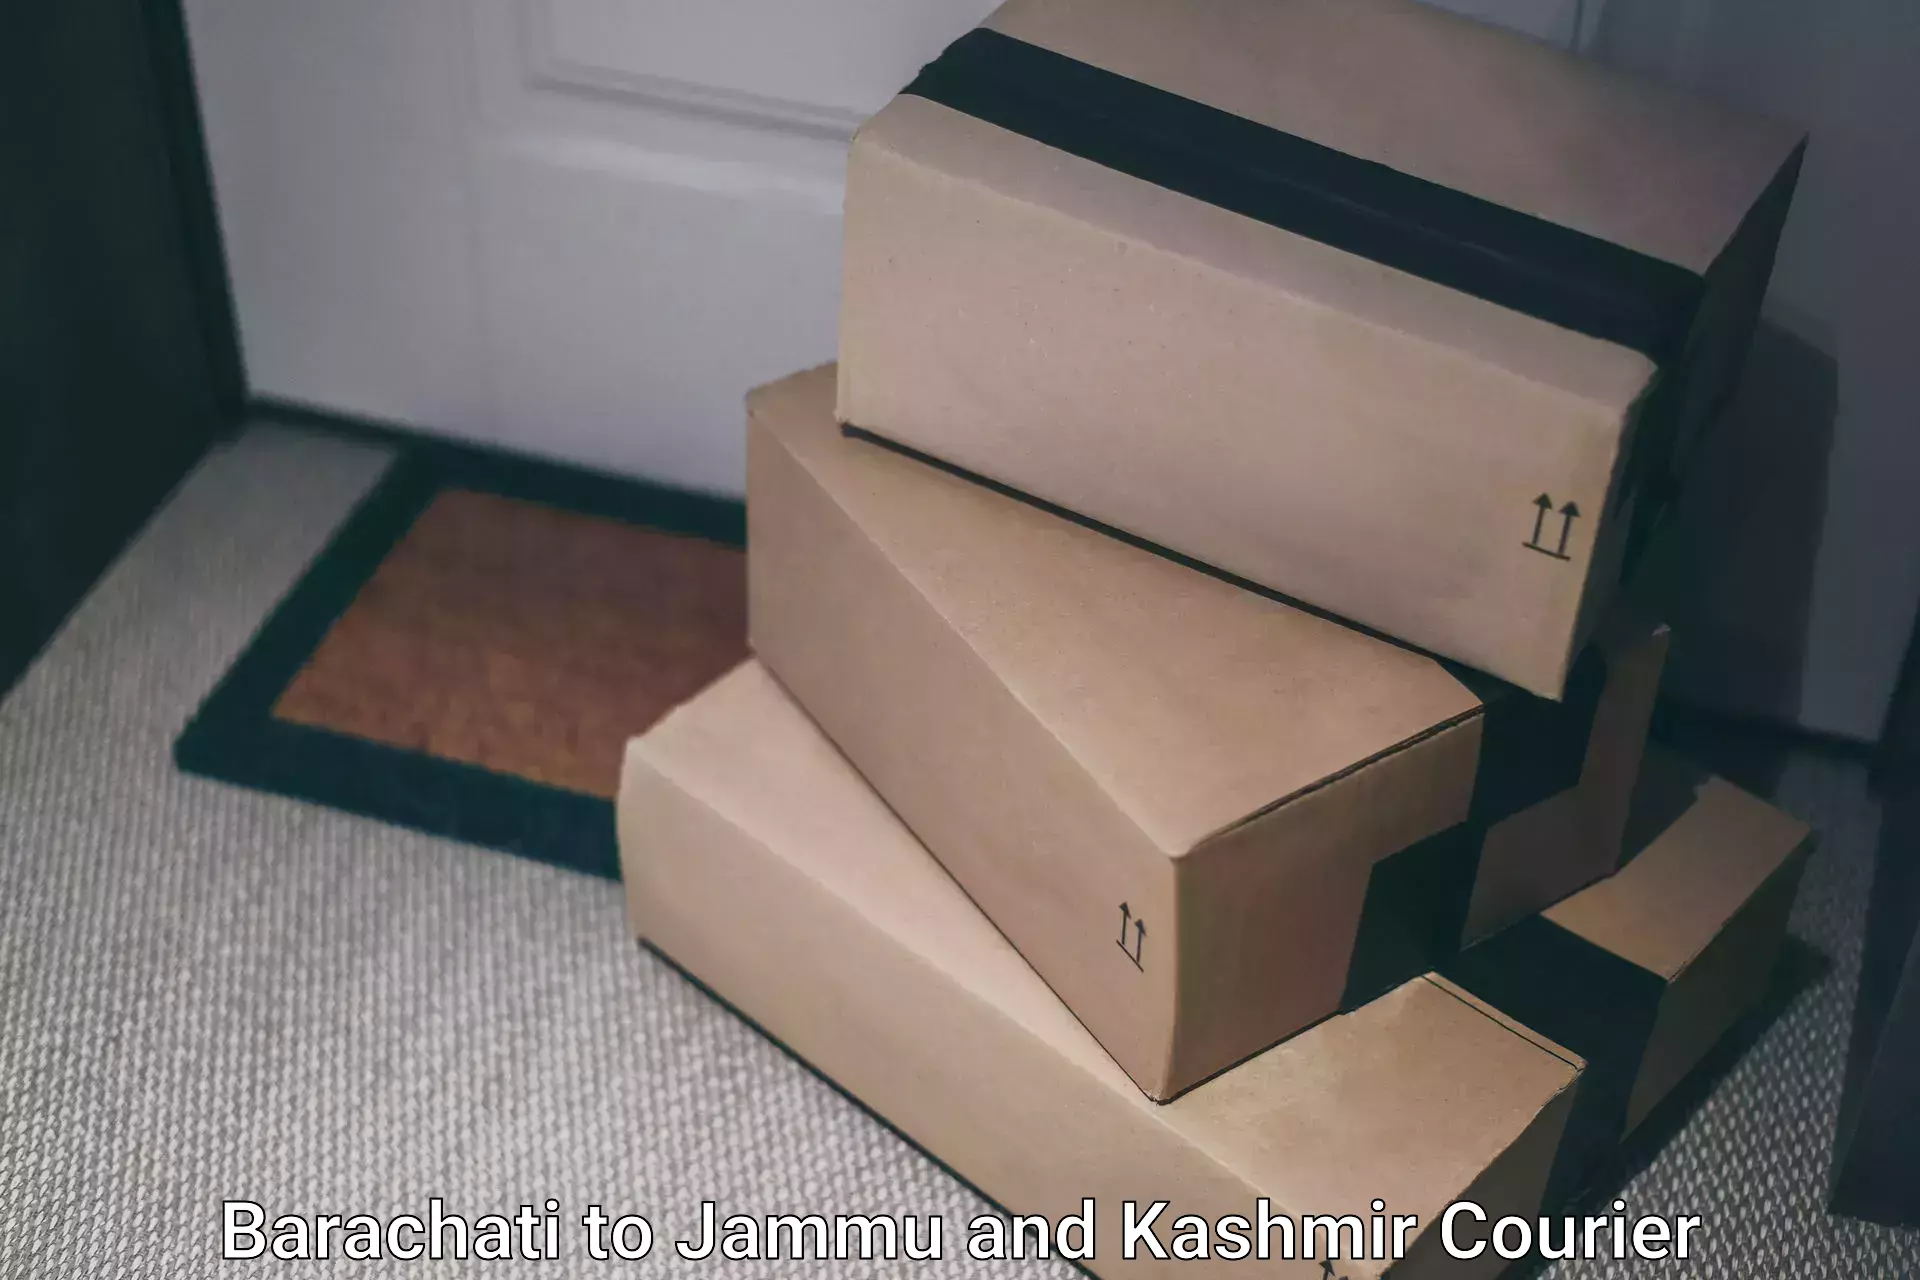 On-demand shipping options Barachati to Udhampur